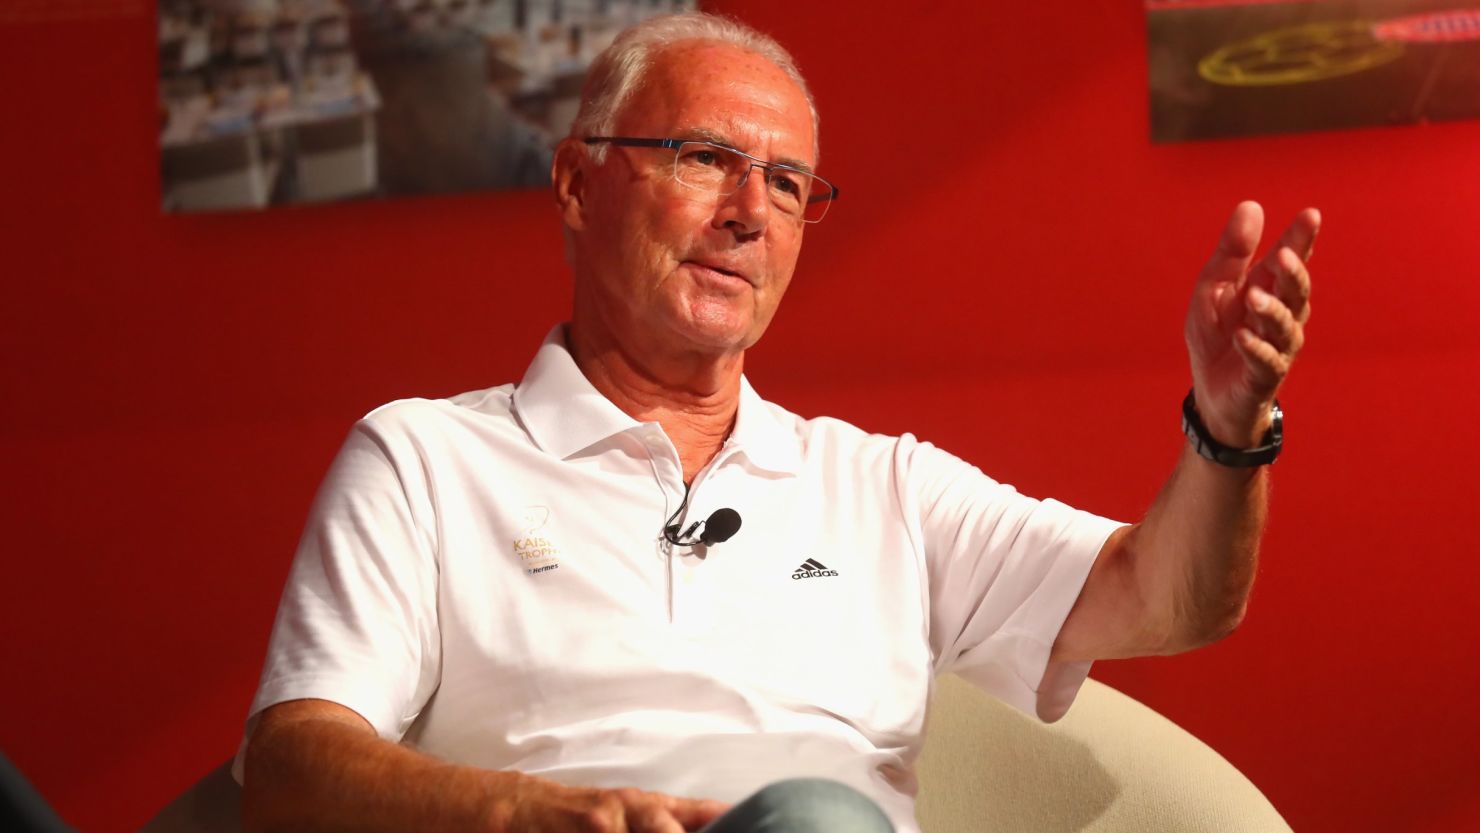 Franz Beckenbauer talks to the guests at the Allianz Arena.